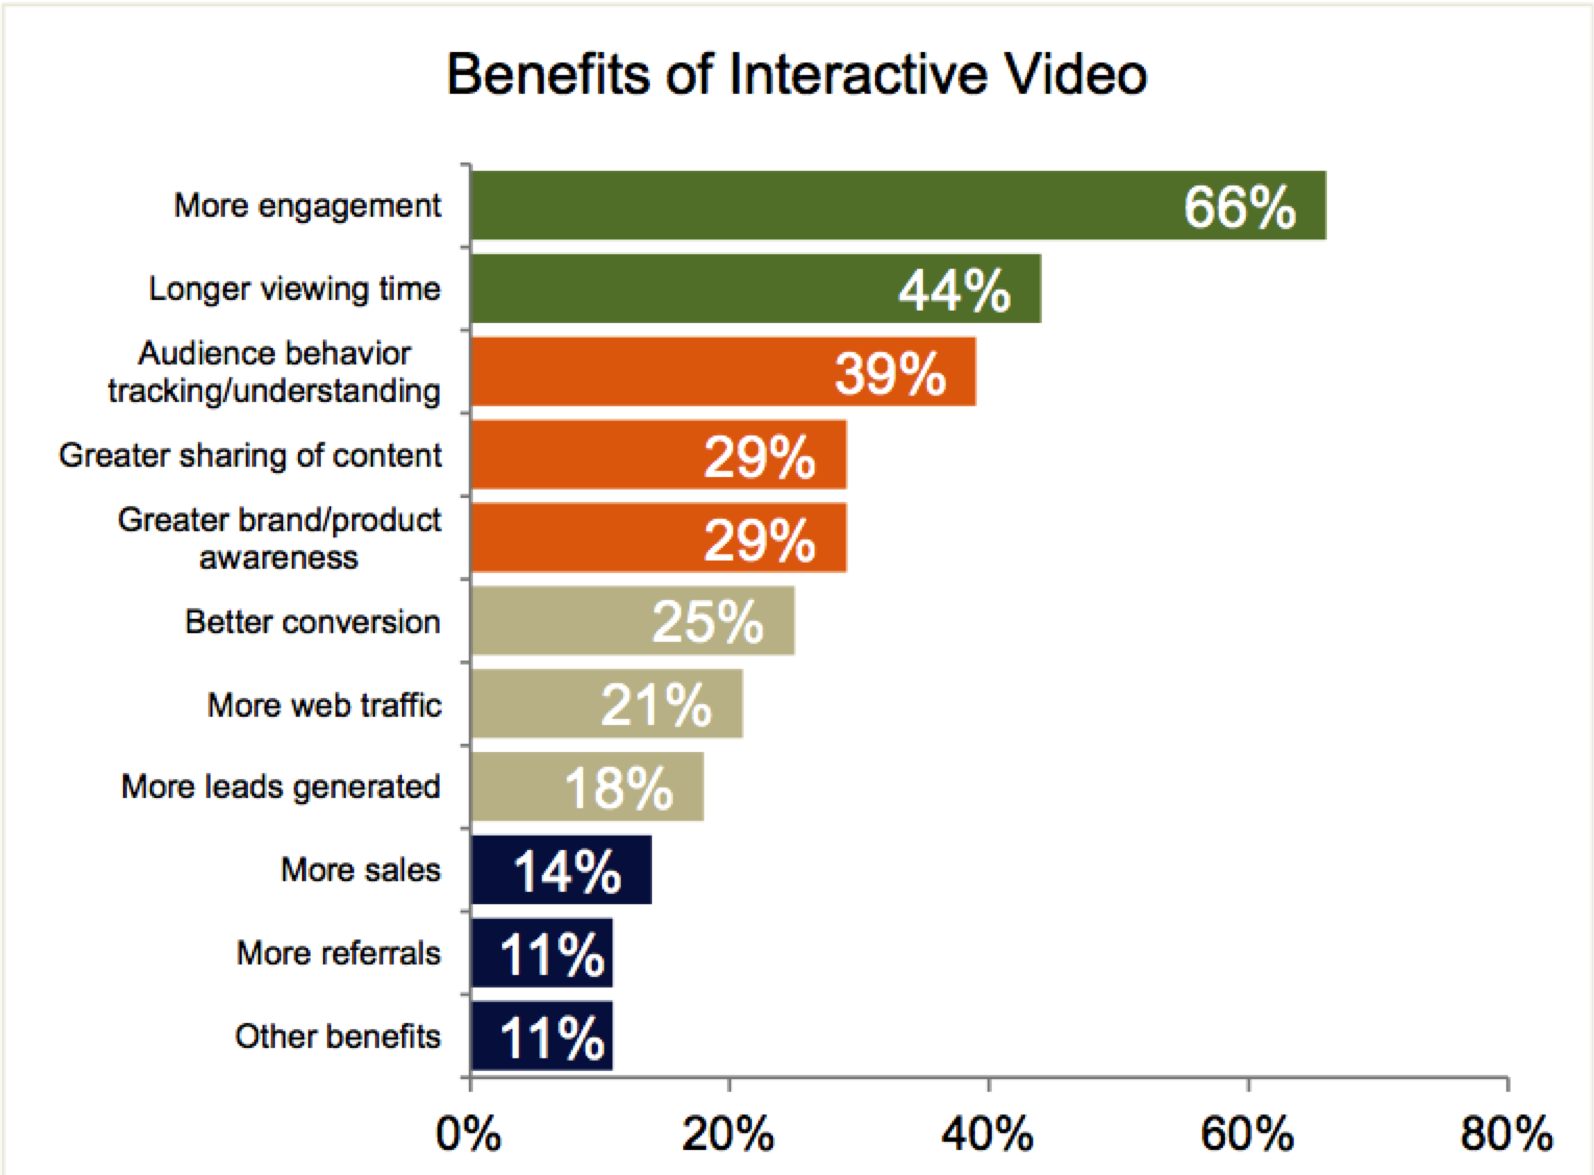 Bar graph depicting the benefits of interactive video